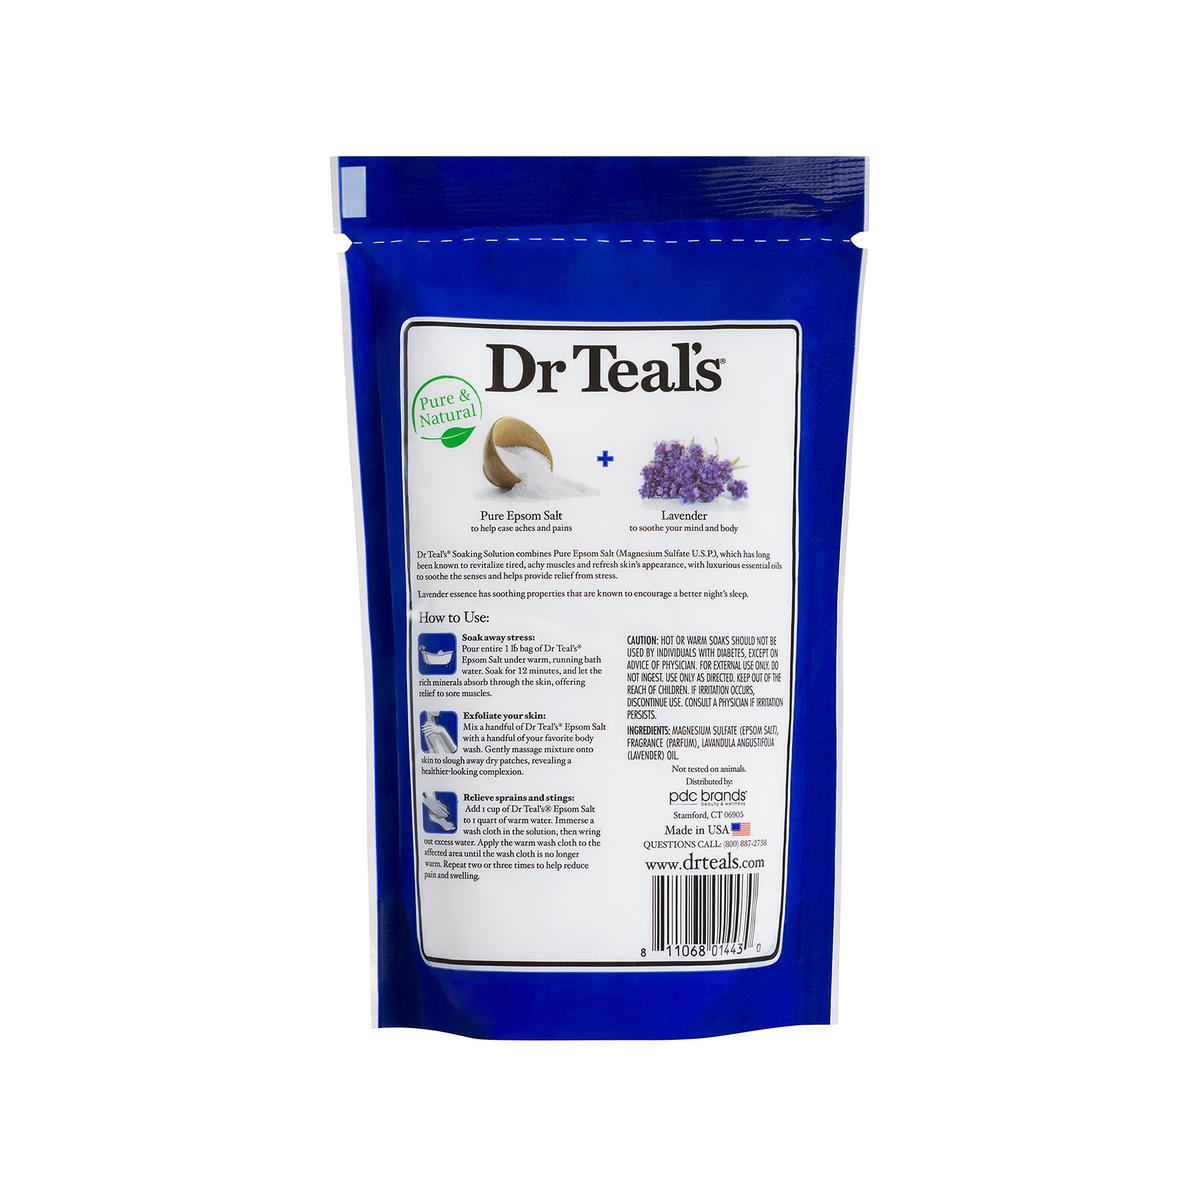 Dr Teal's Soothe & Sleep With Lavender Pure Epsom Salt Soaking Solution 450g